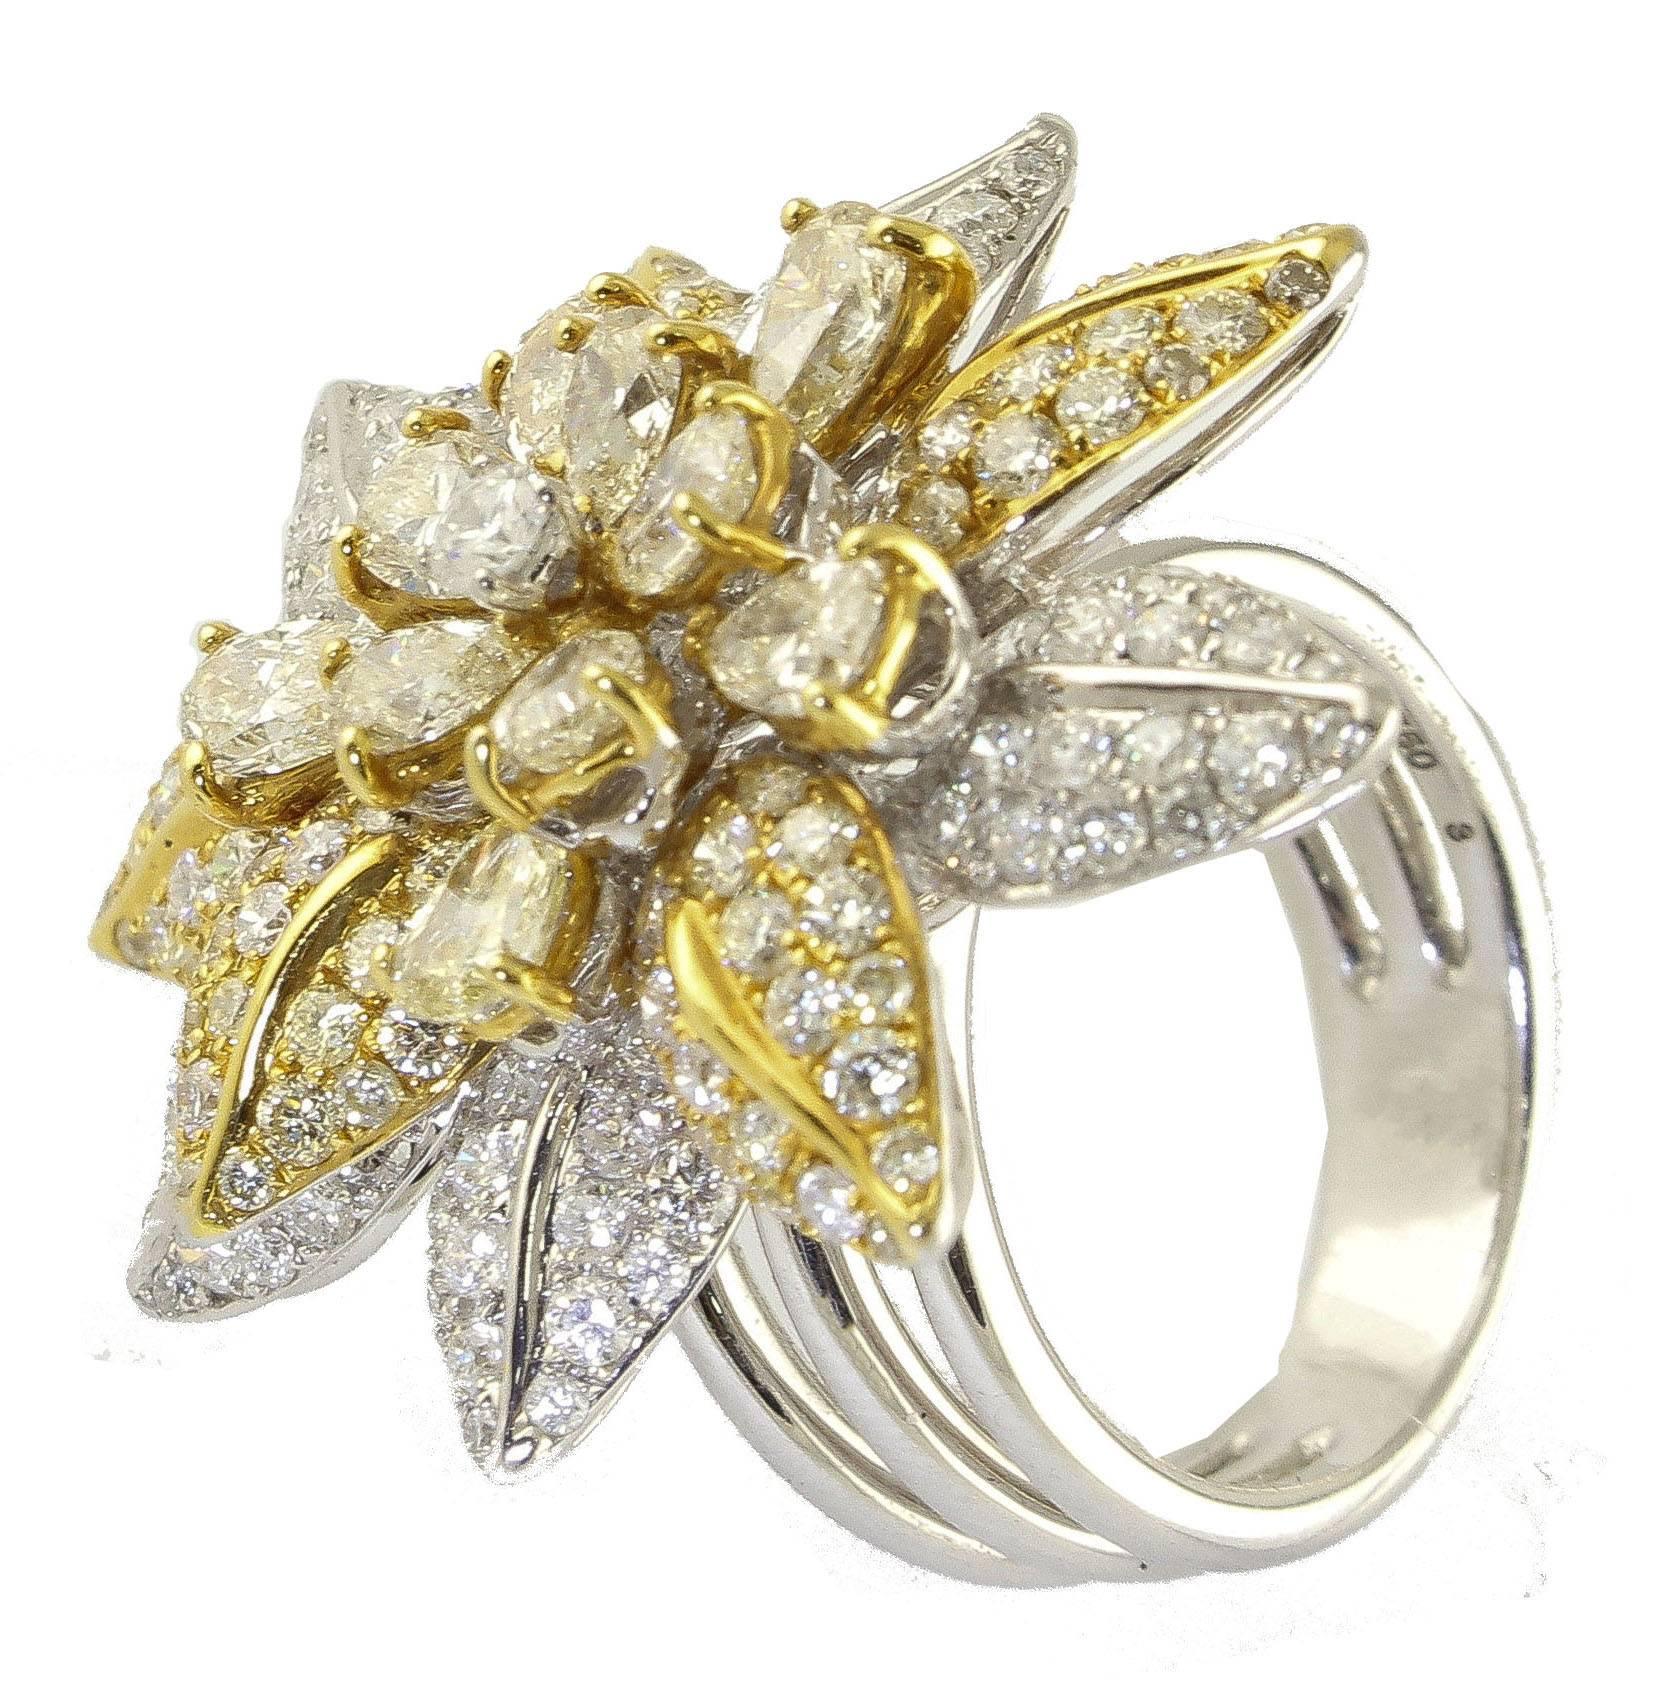 shipping policy: 
No additional costs will be added to this order.
Shipping costs will be totally covered by the seller (customs duties included). 

Charming flower ring in 18 kt white and yellow gold studded with white and yellow diamonds (4.64